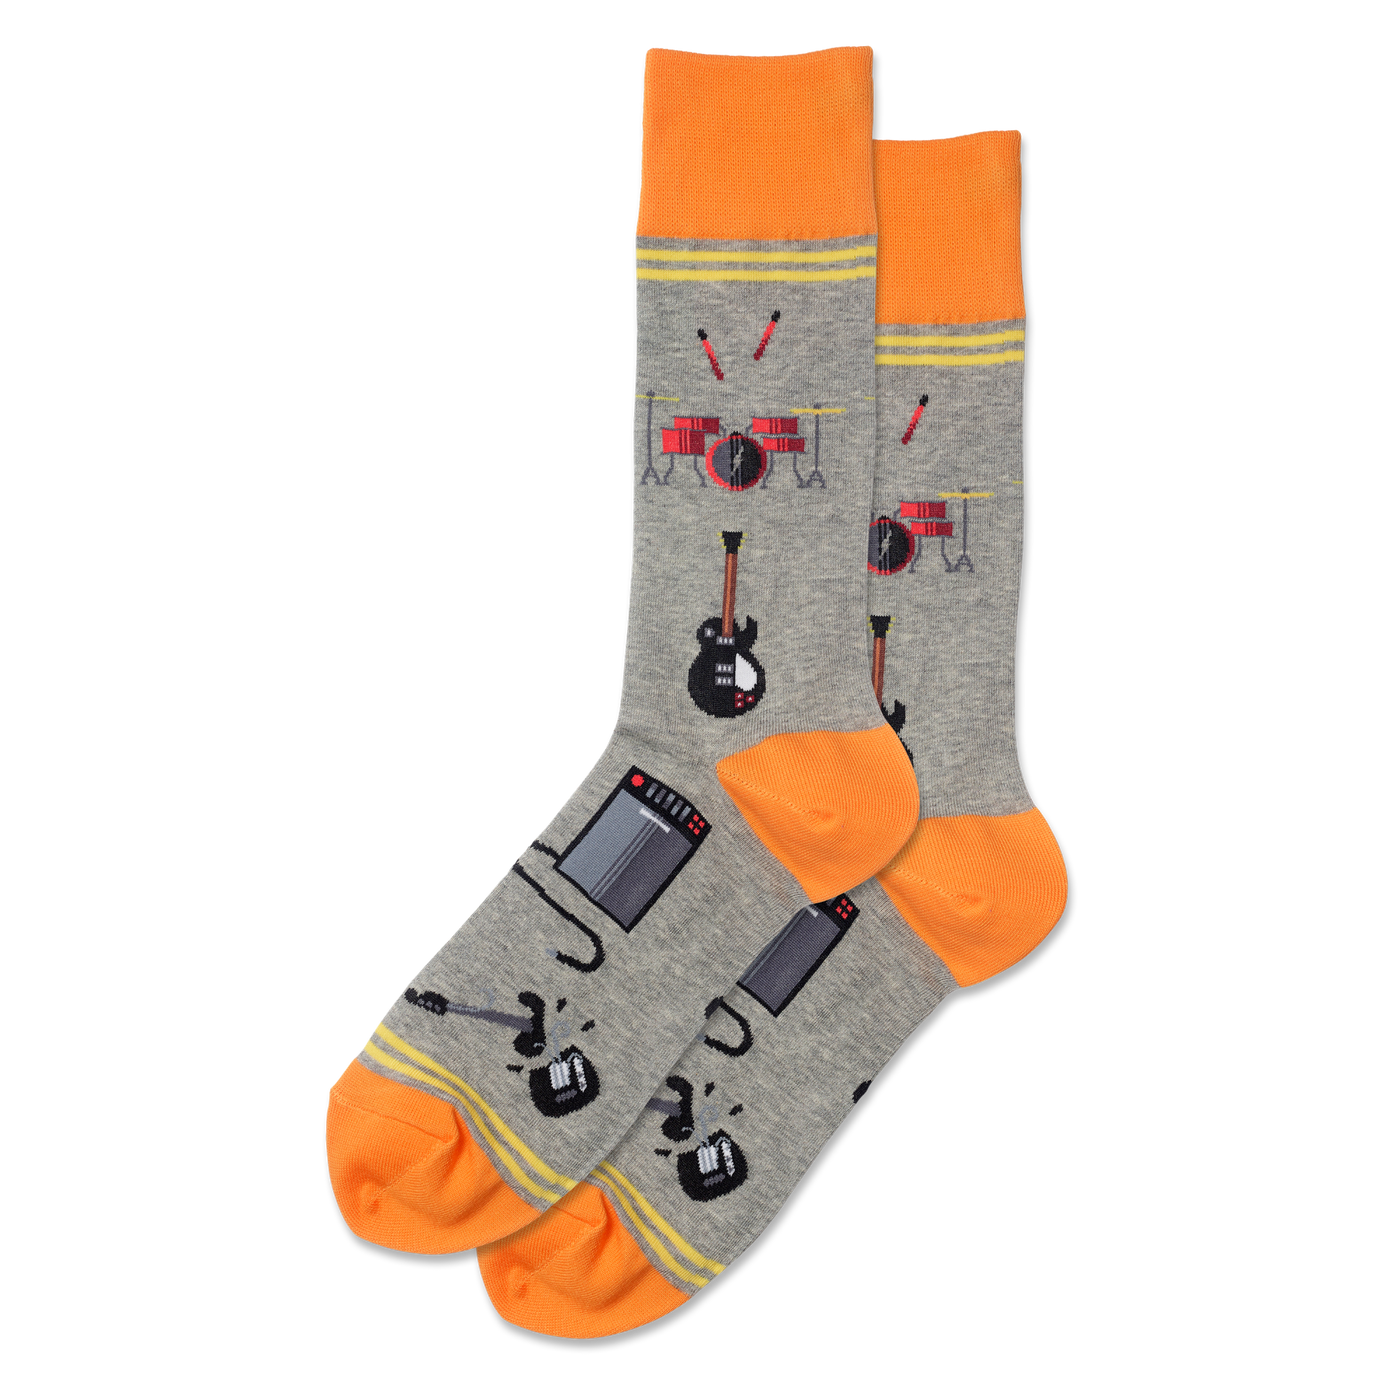 "Garage Band" Cotton Crew Socks by Hot Sox - Large